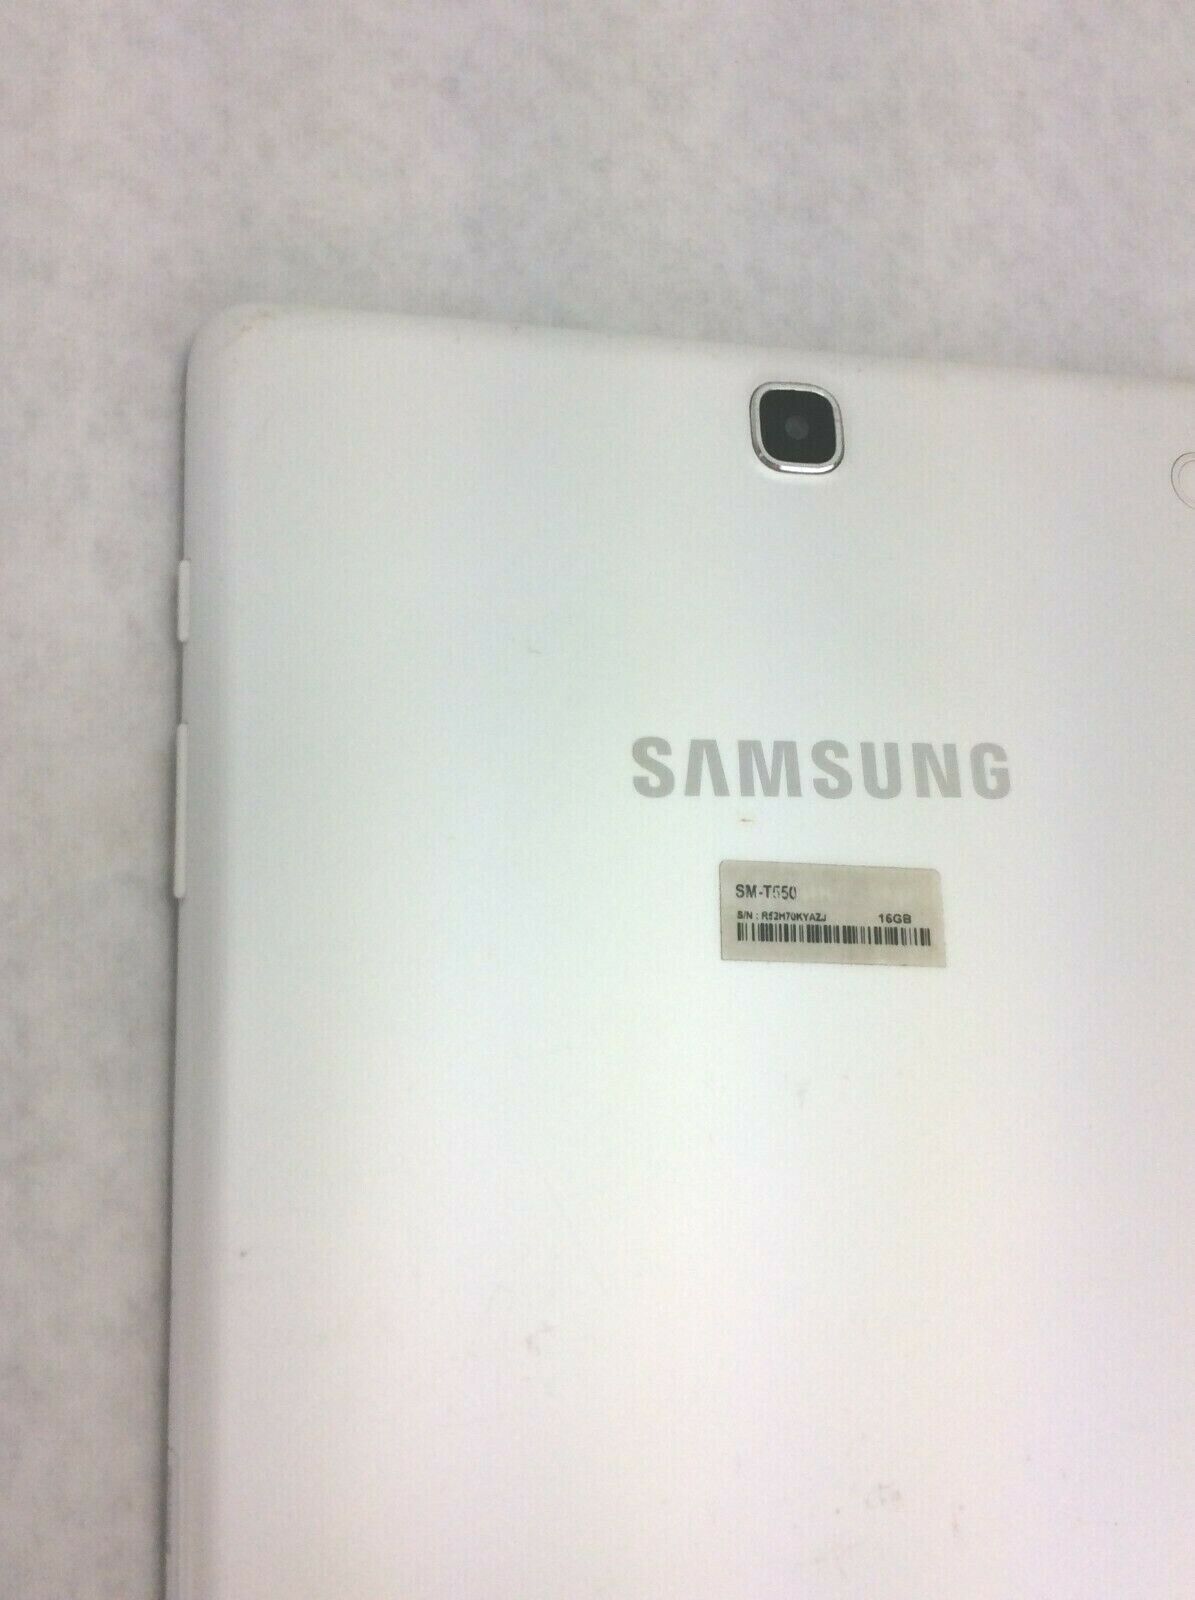 Samsung Galaxy Tab A 16GB Wi-Fi 9.7in White Tablet SM-P550 - Cracked Screen